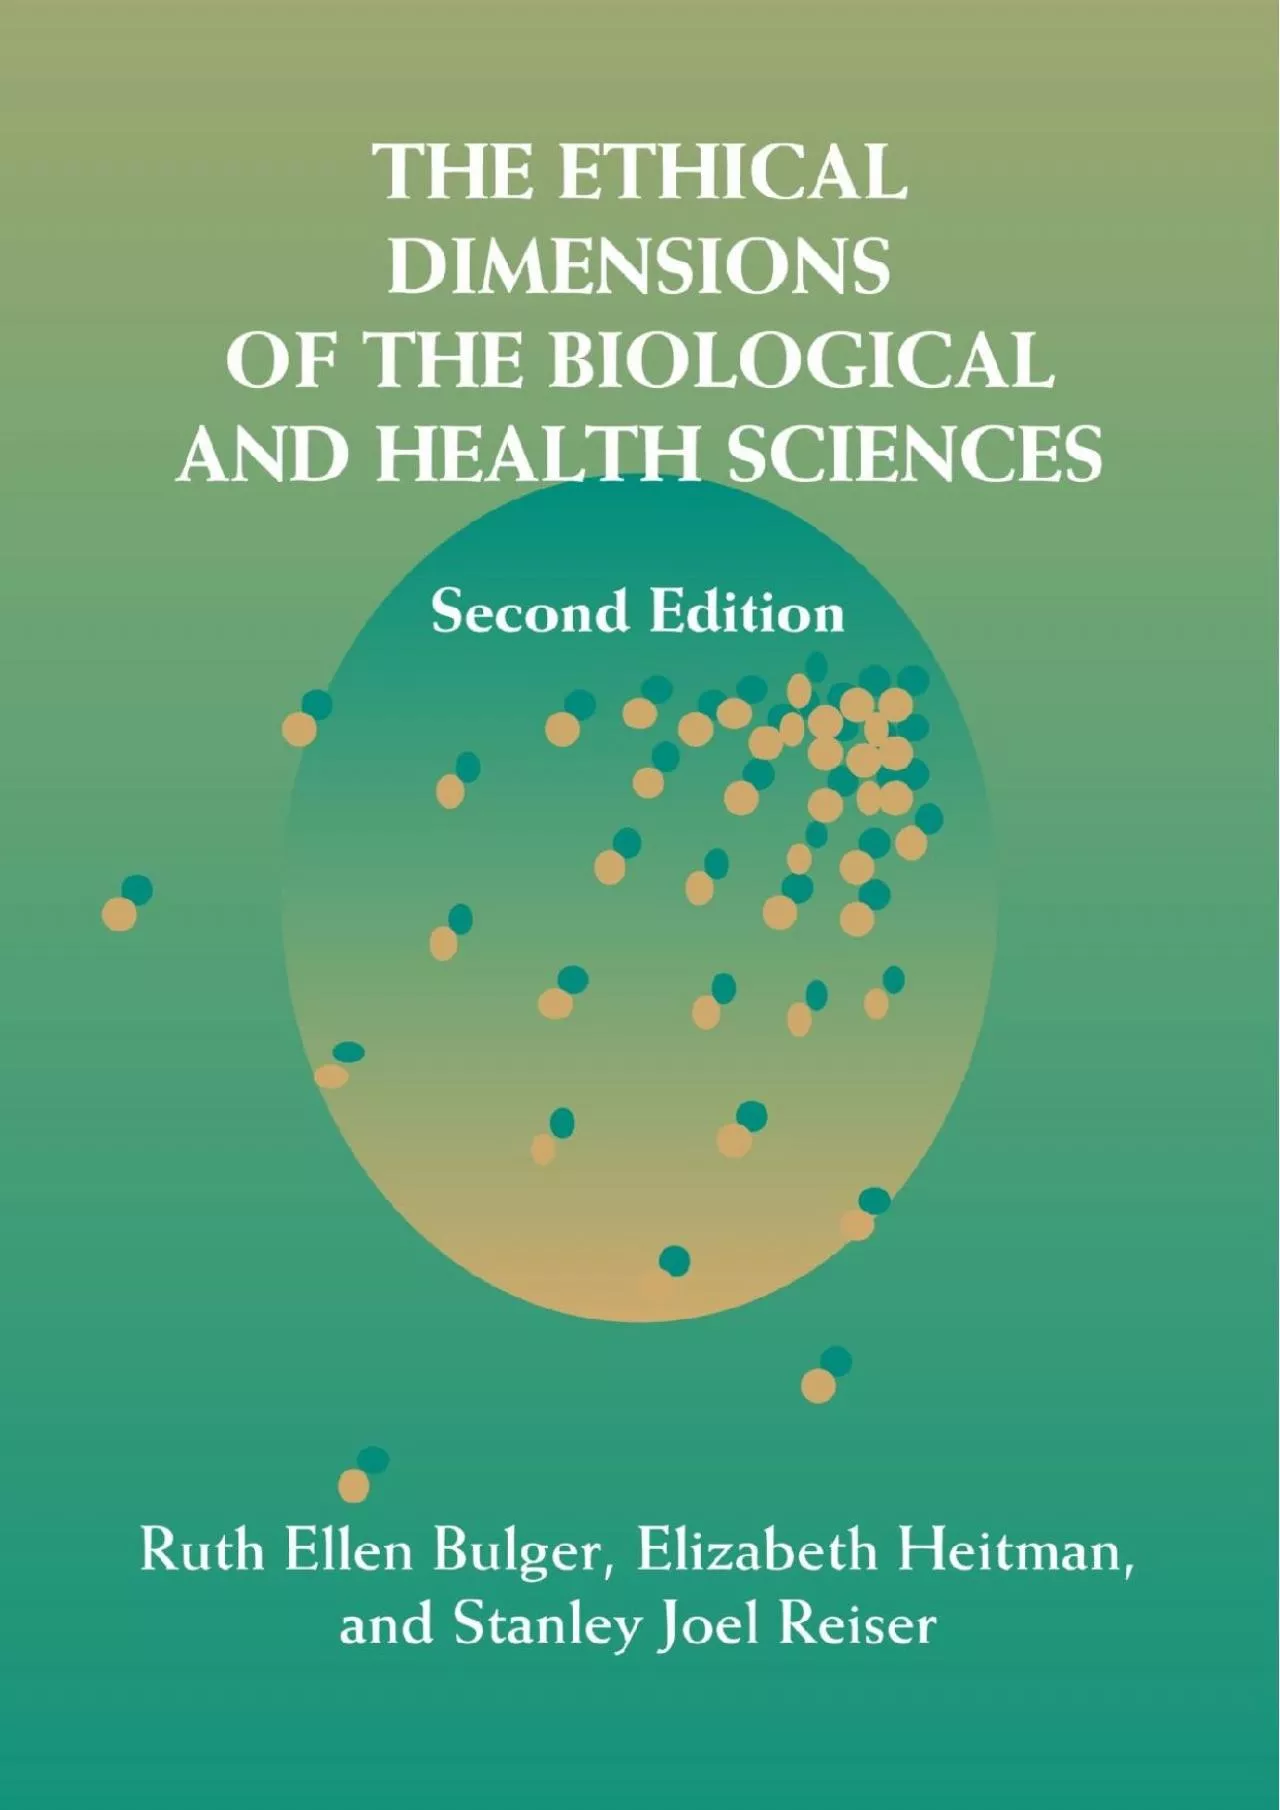 (DOWNLOAD)-The Ethical Dimensions of the Biological and Health Sciences